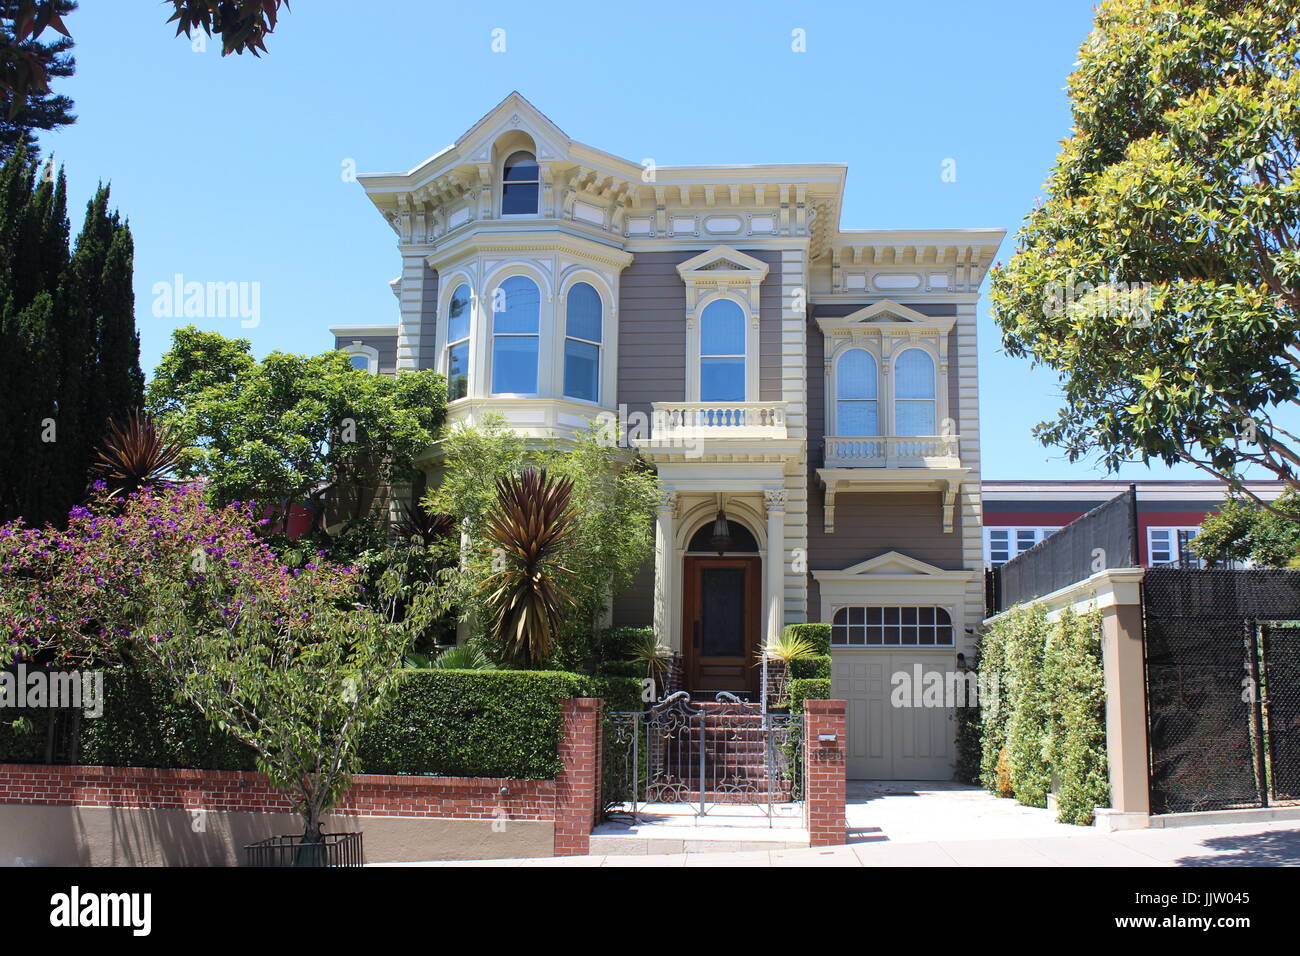 Ortman-Shumate House, Italianate/Queen Anne built 1870, Lower Pacific Heights, Upper Fillmore, San Francisco, California Stock Photo